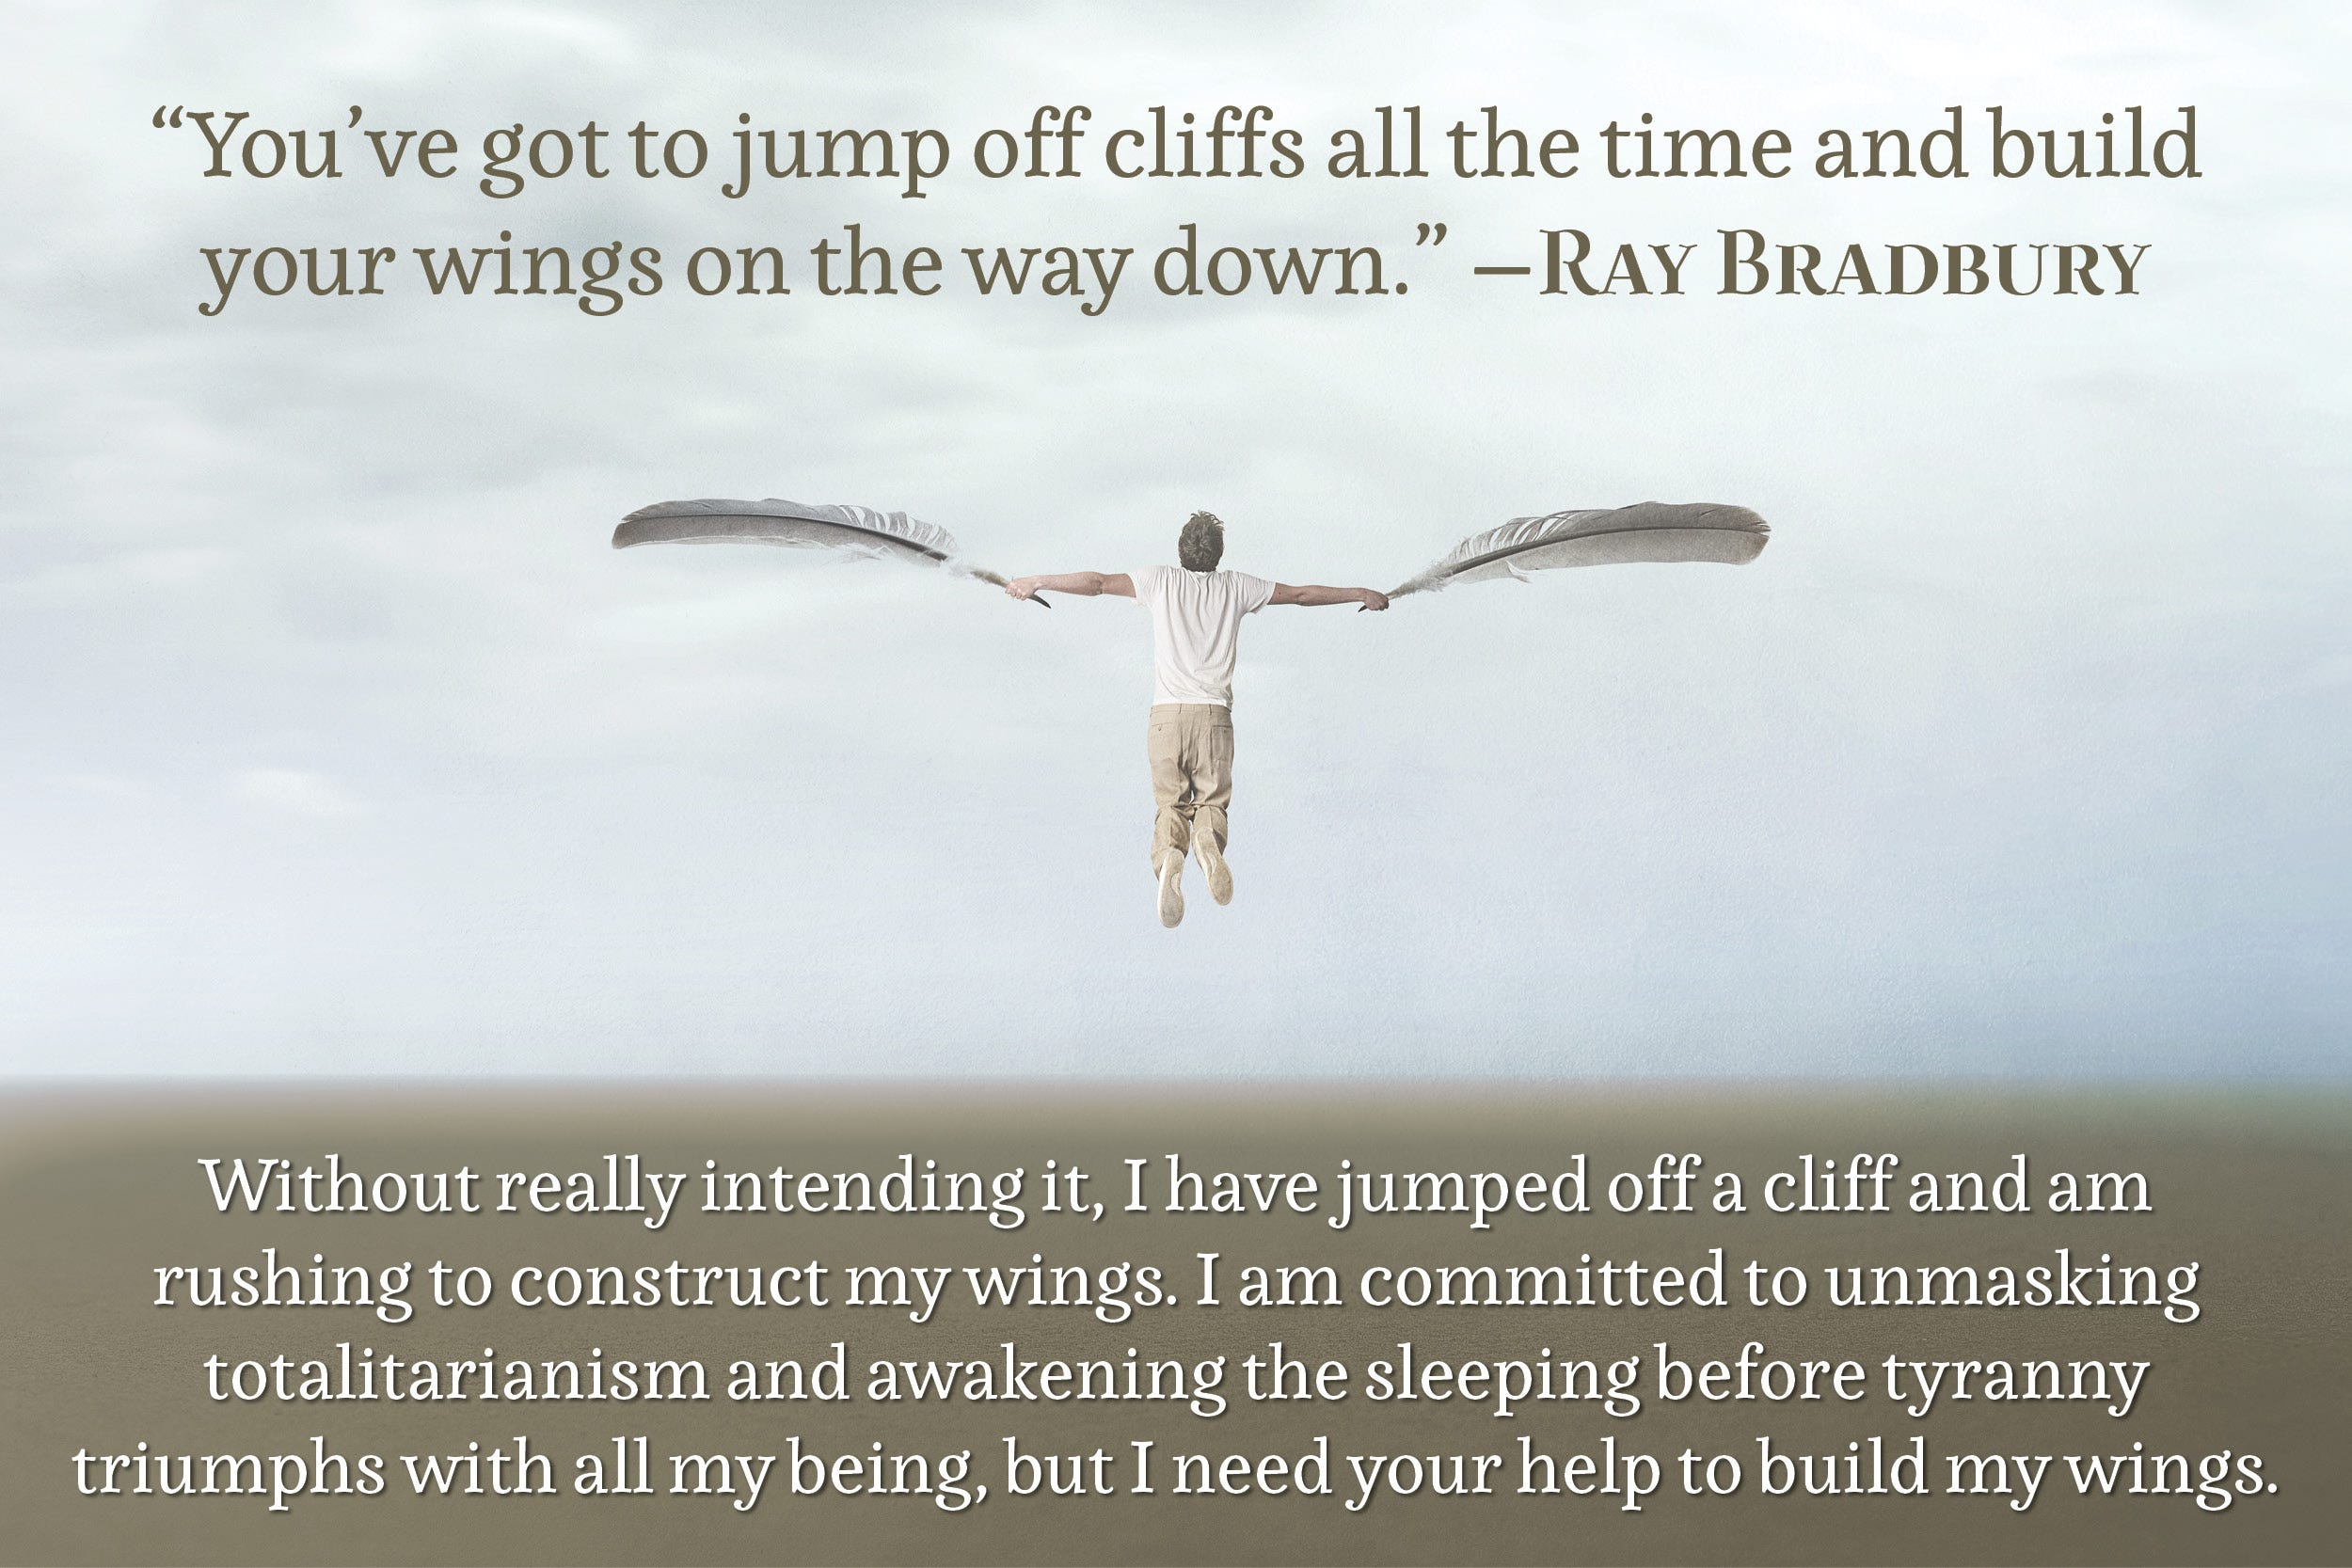 “You've got to jump off cliffs all the time and build your wings on the way down.” —Ray Bradbury